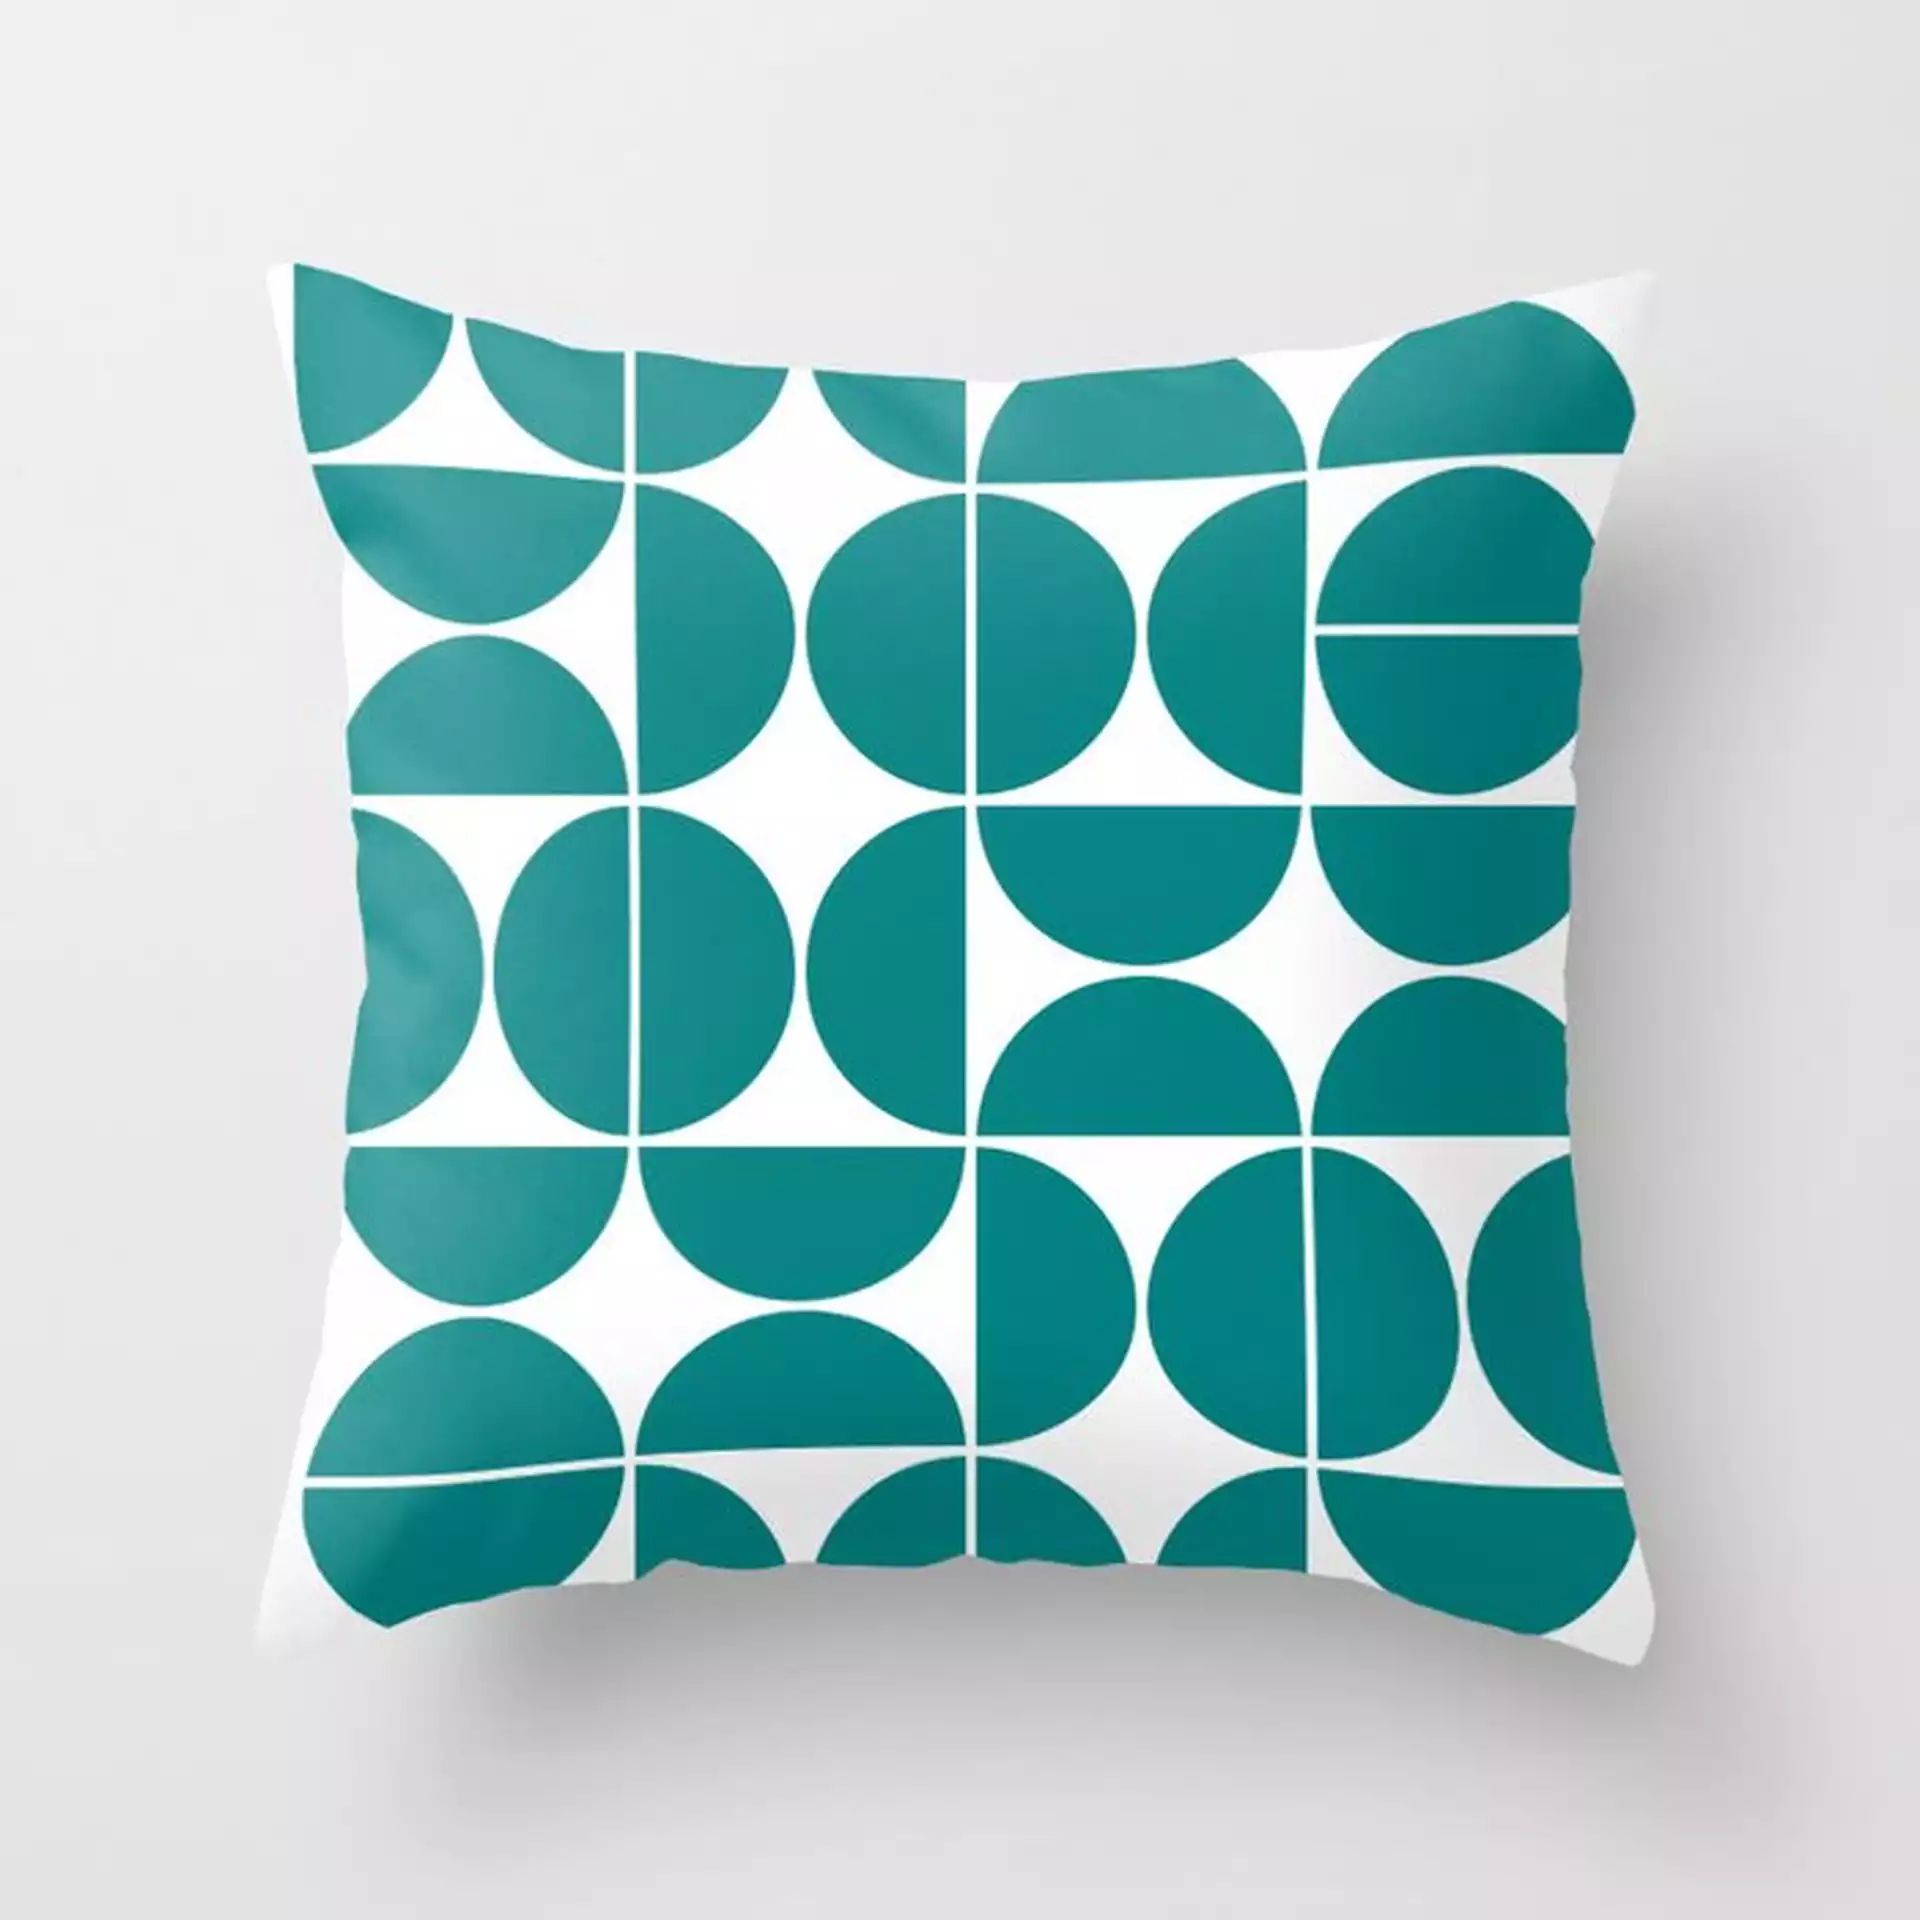 Mid Century Modern Geometric 04 Teal Couch Throw Pillow by The Old Art Studio - Cover (20" x 20") with pillow insert - Outdoor Pillow